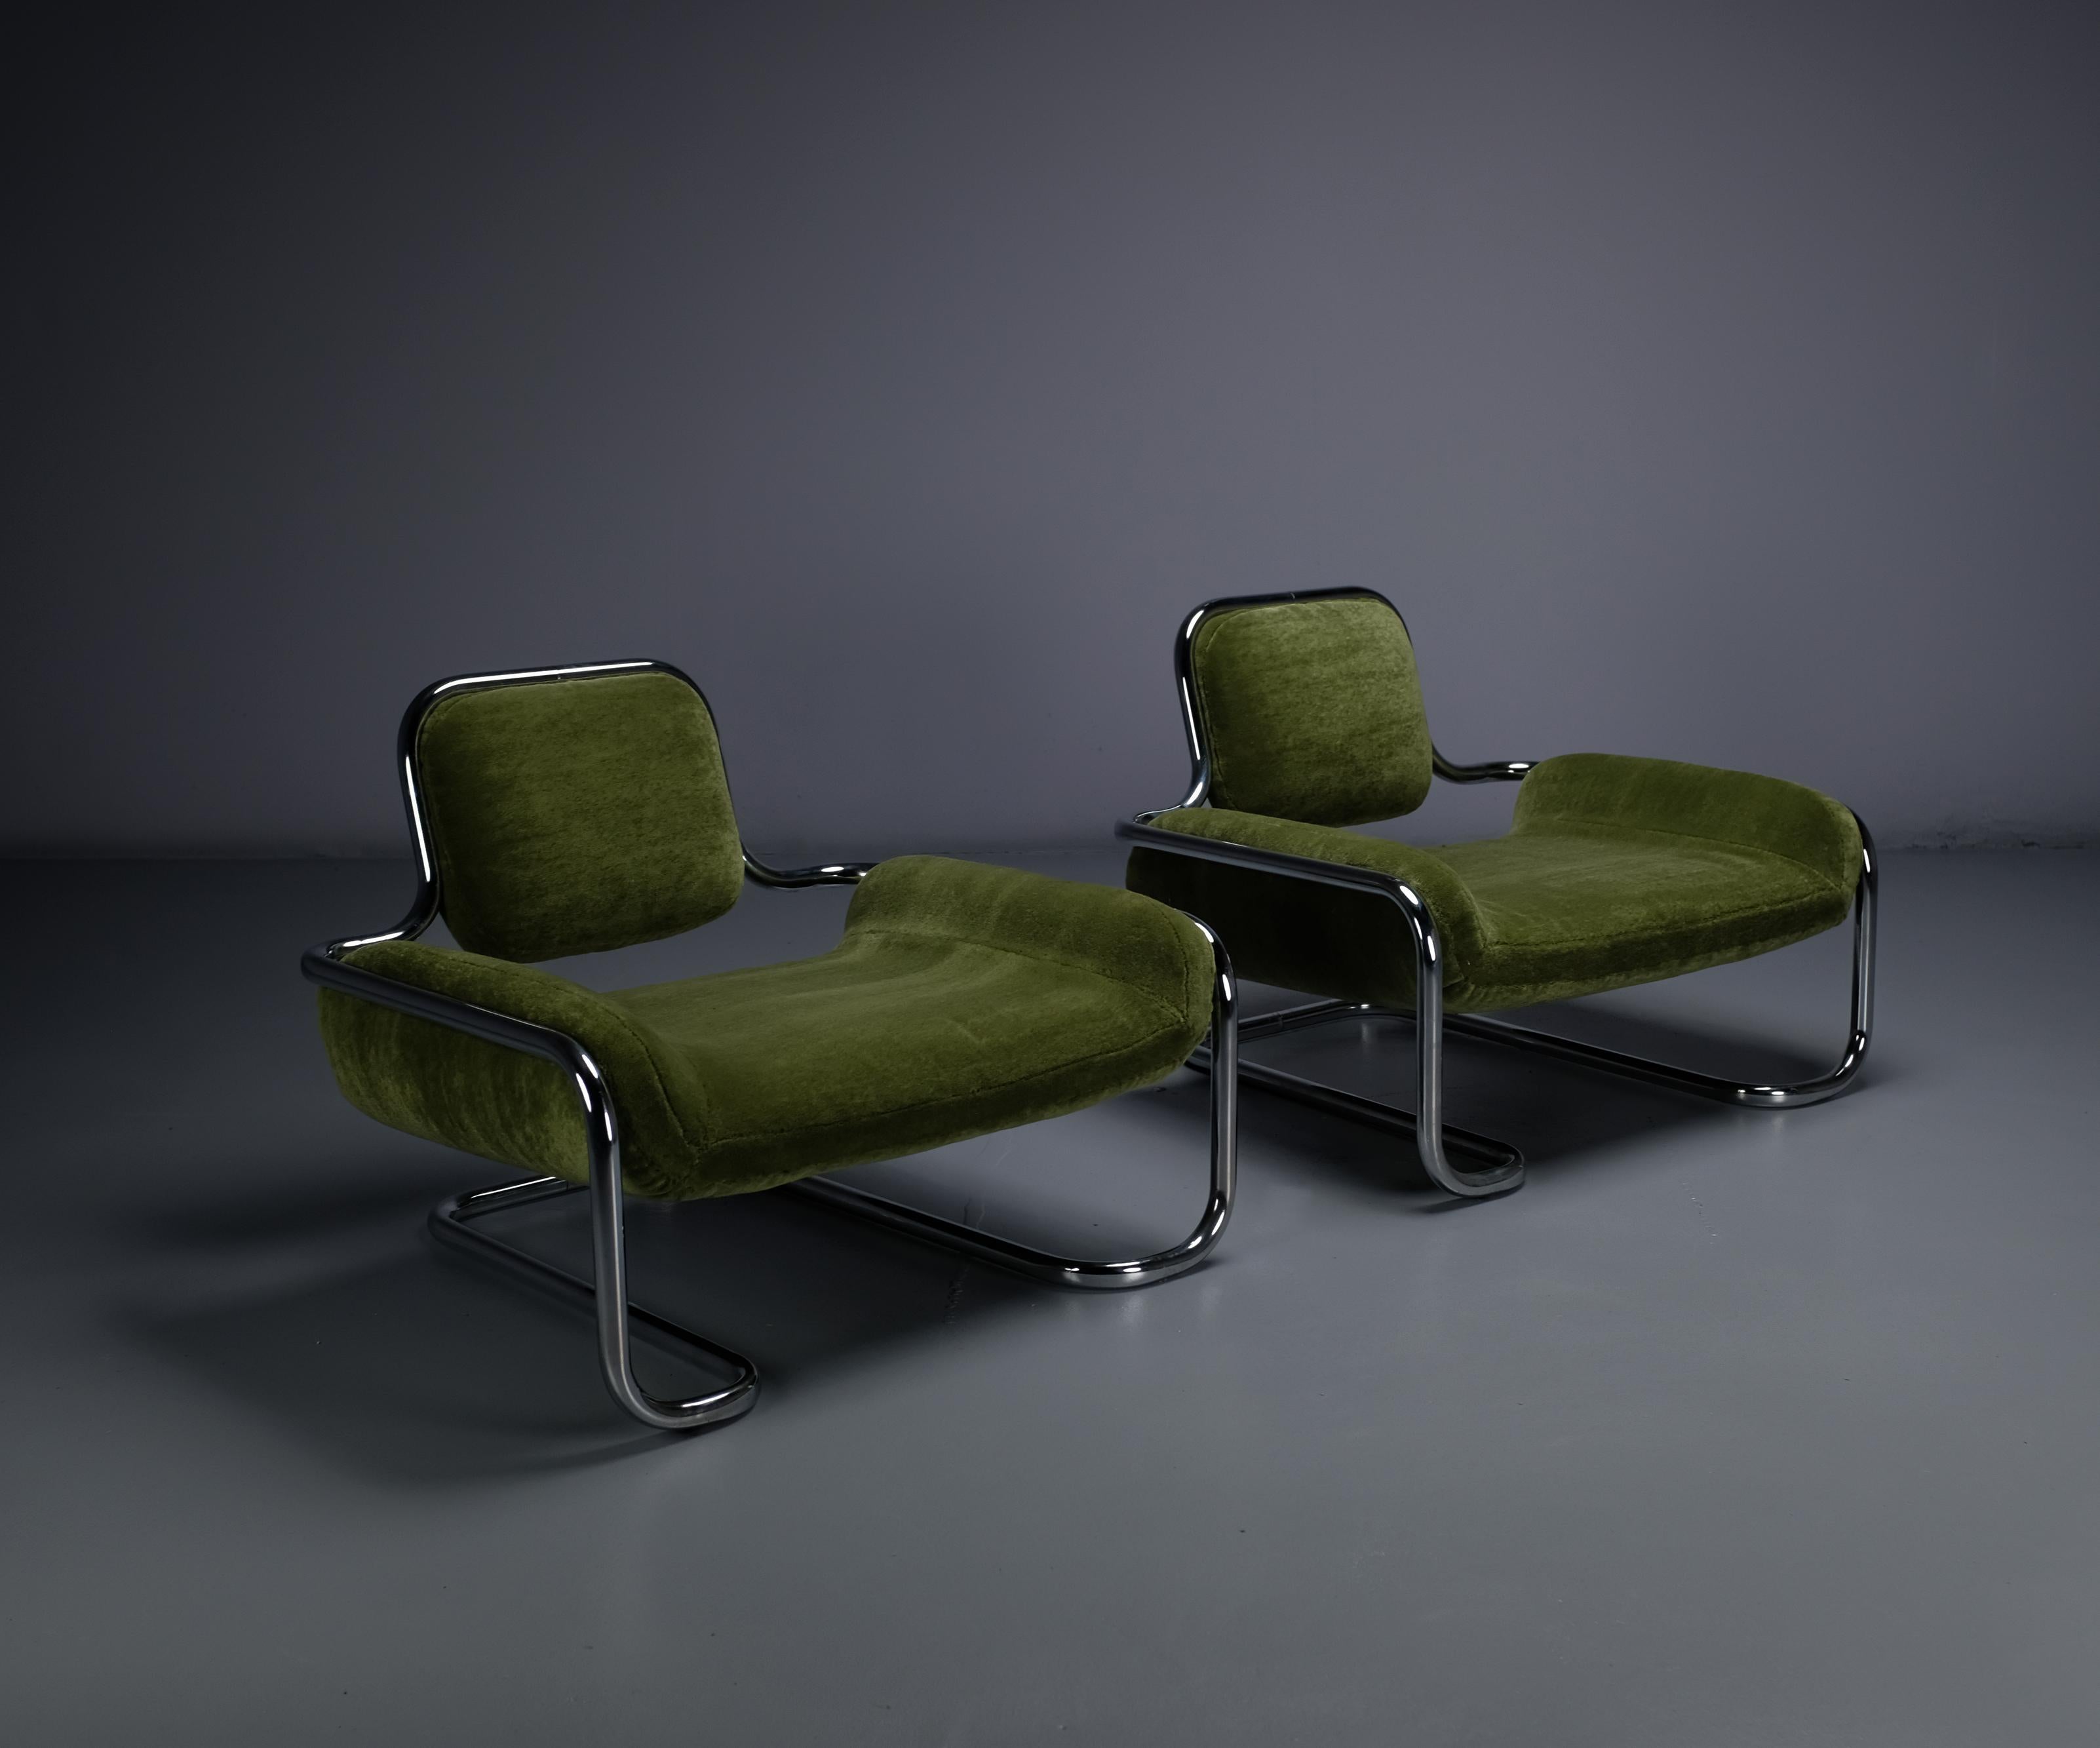 Green Mohair Lemon Sole Lounge Chairs by Kwok Hoi Chan. Ed. Steiner 2